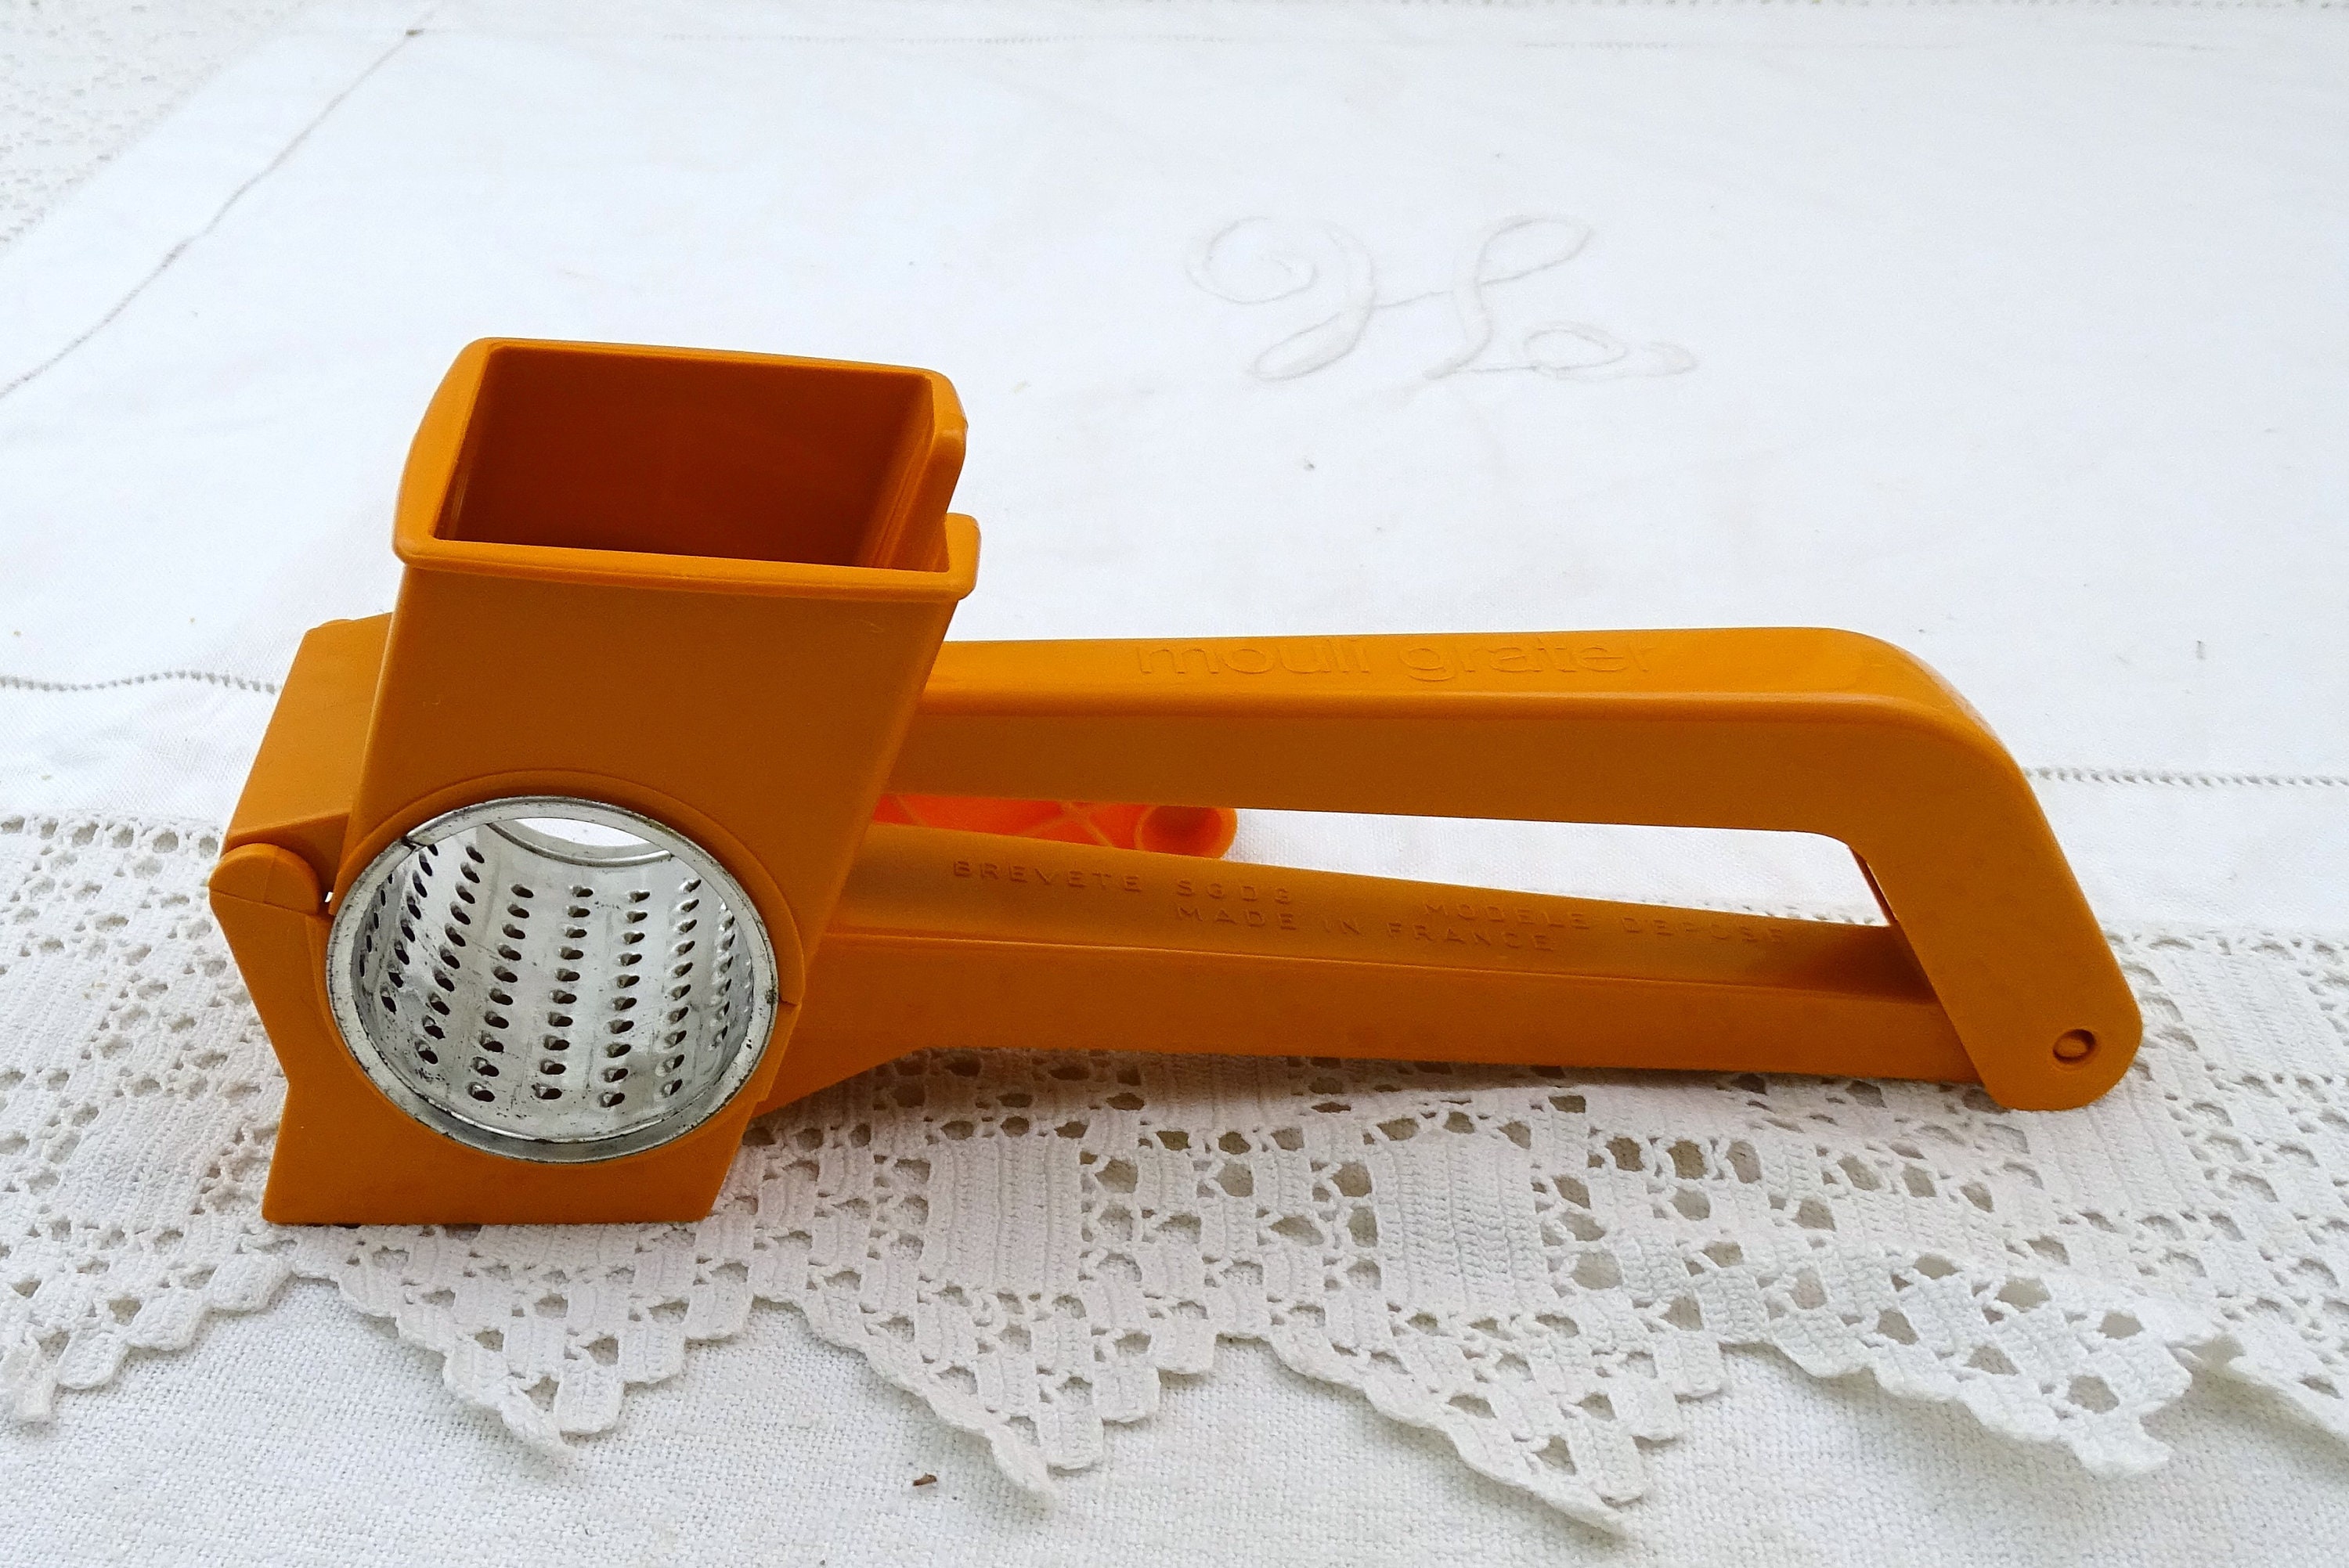 A MOULI PRODUCT MOULI GRATER 8 ROTARY GRATER MADE IN FRANCE USA